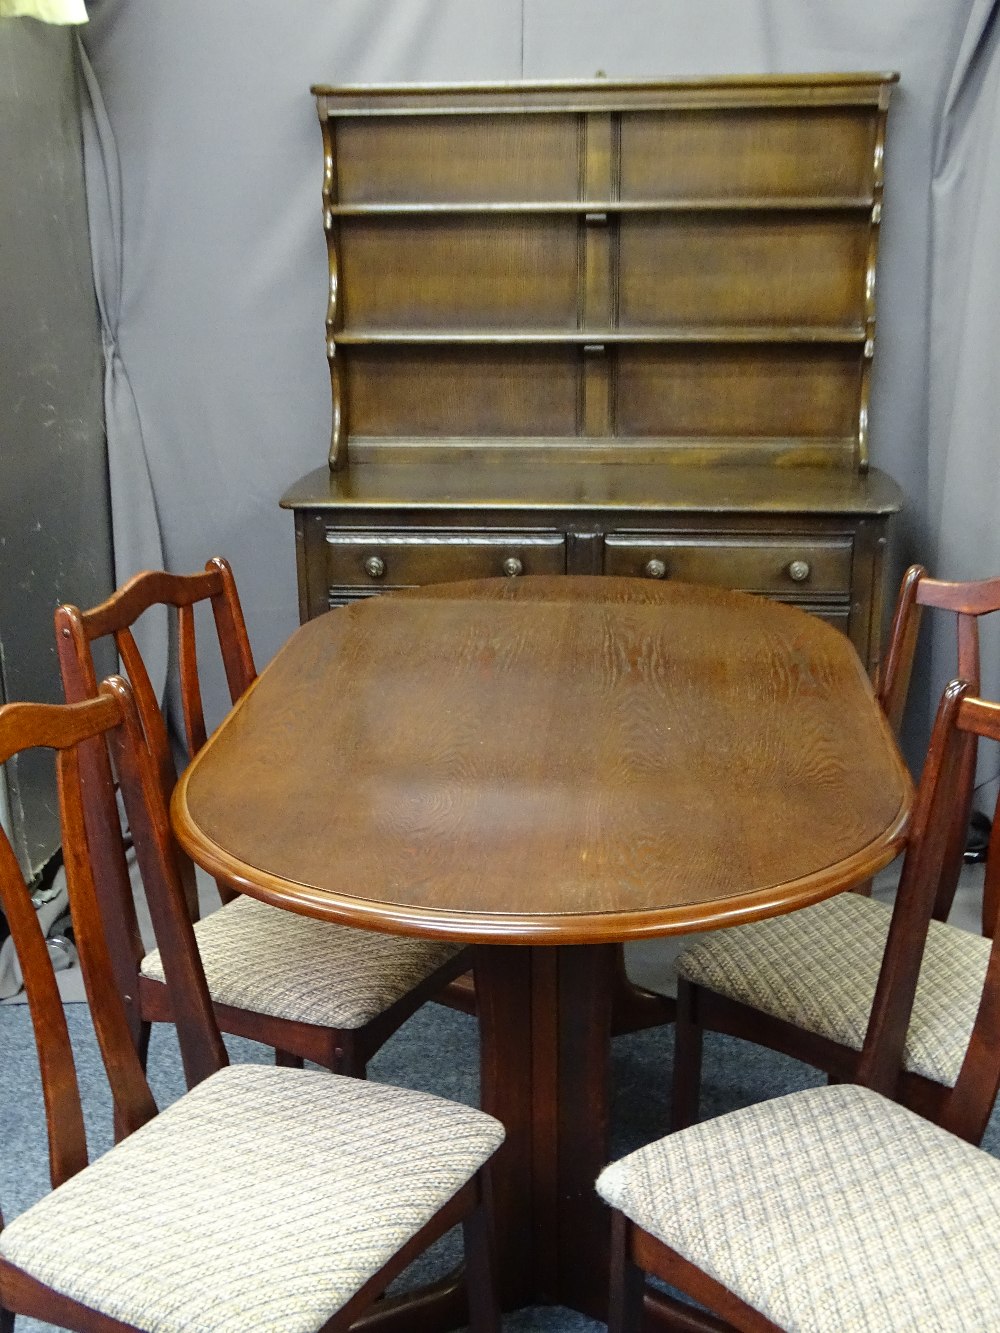 PRIORY STYLE OAK DRESSER and a reproduction mahogany dining table and four chairs with upholstered